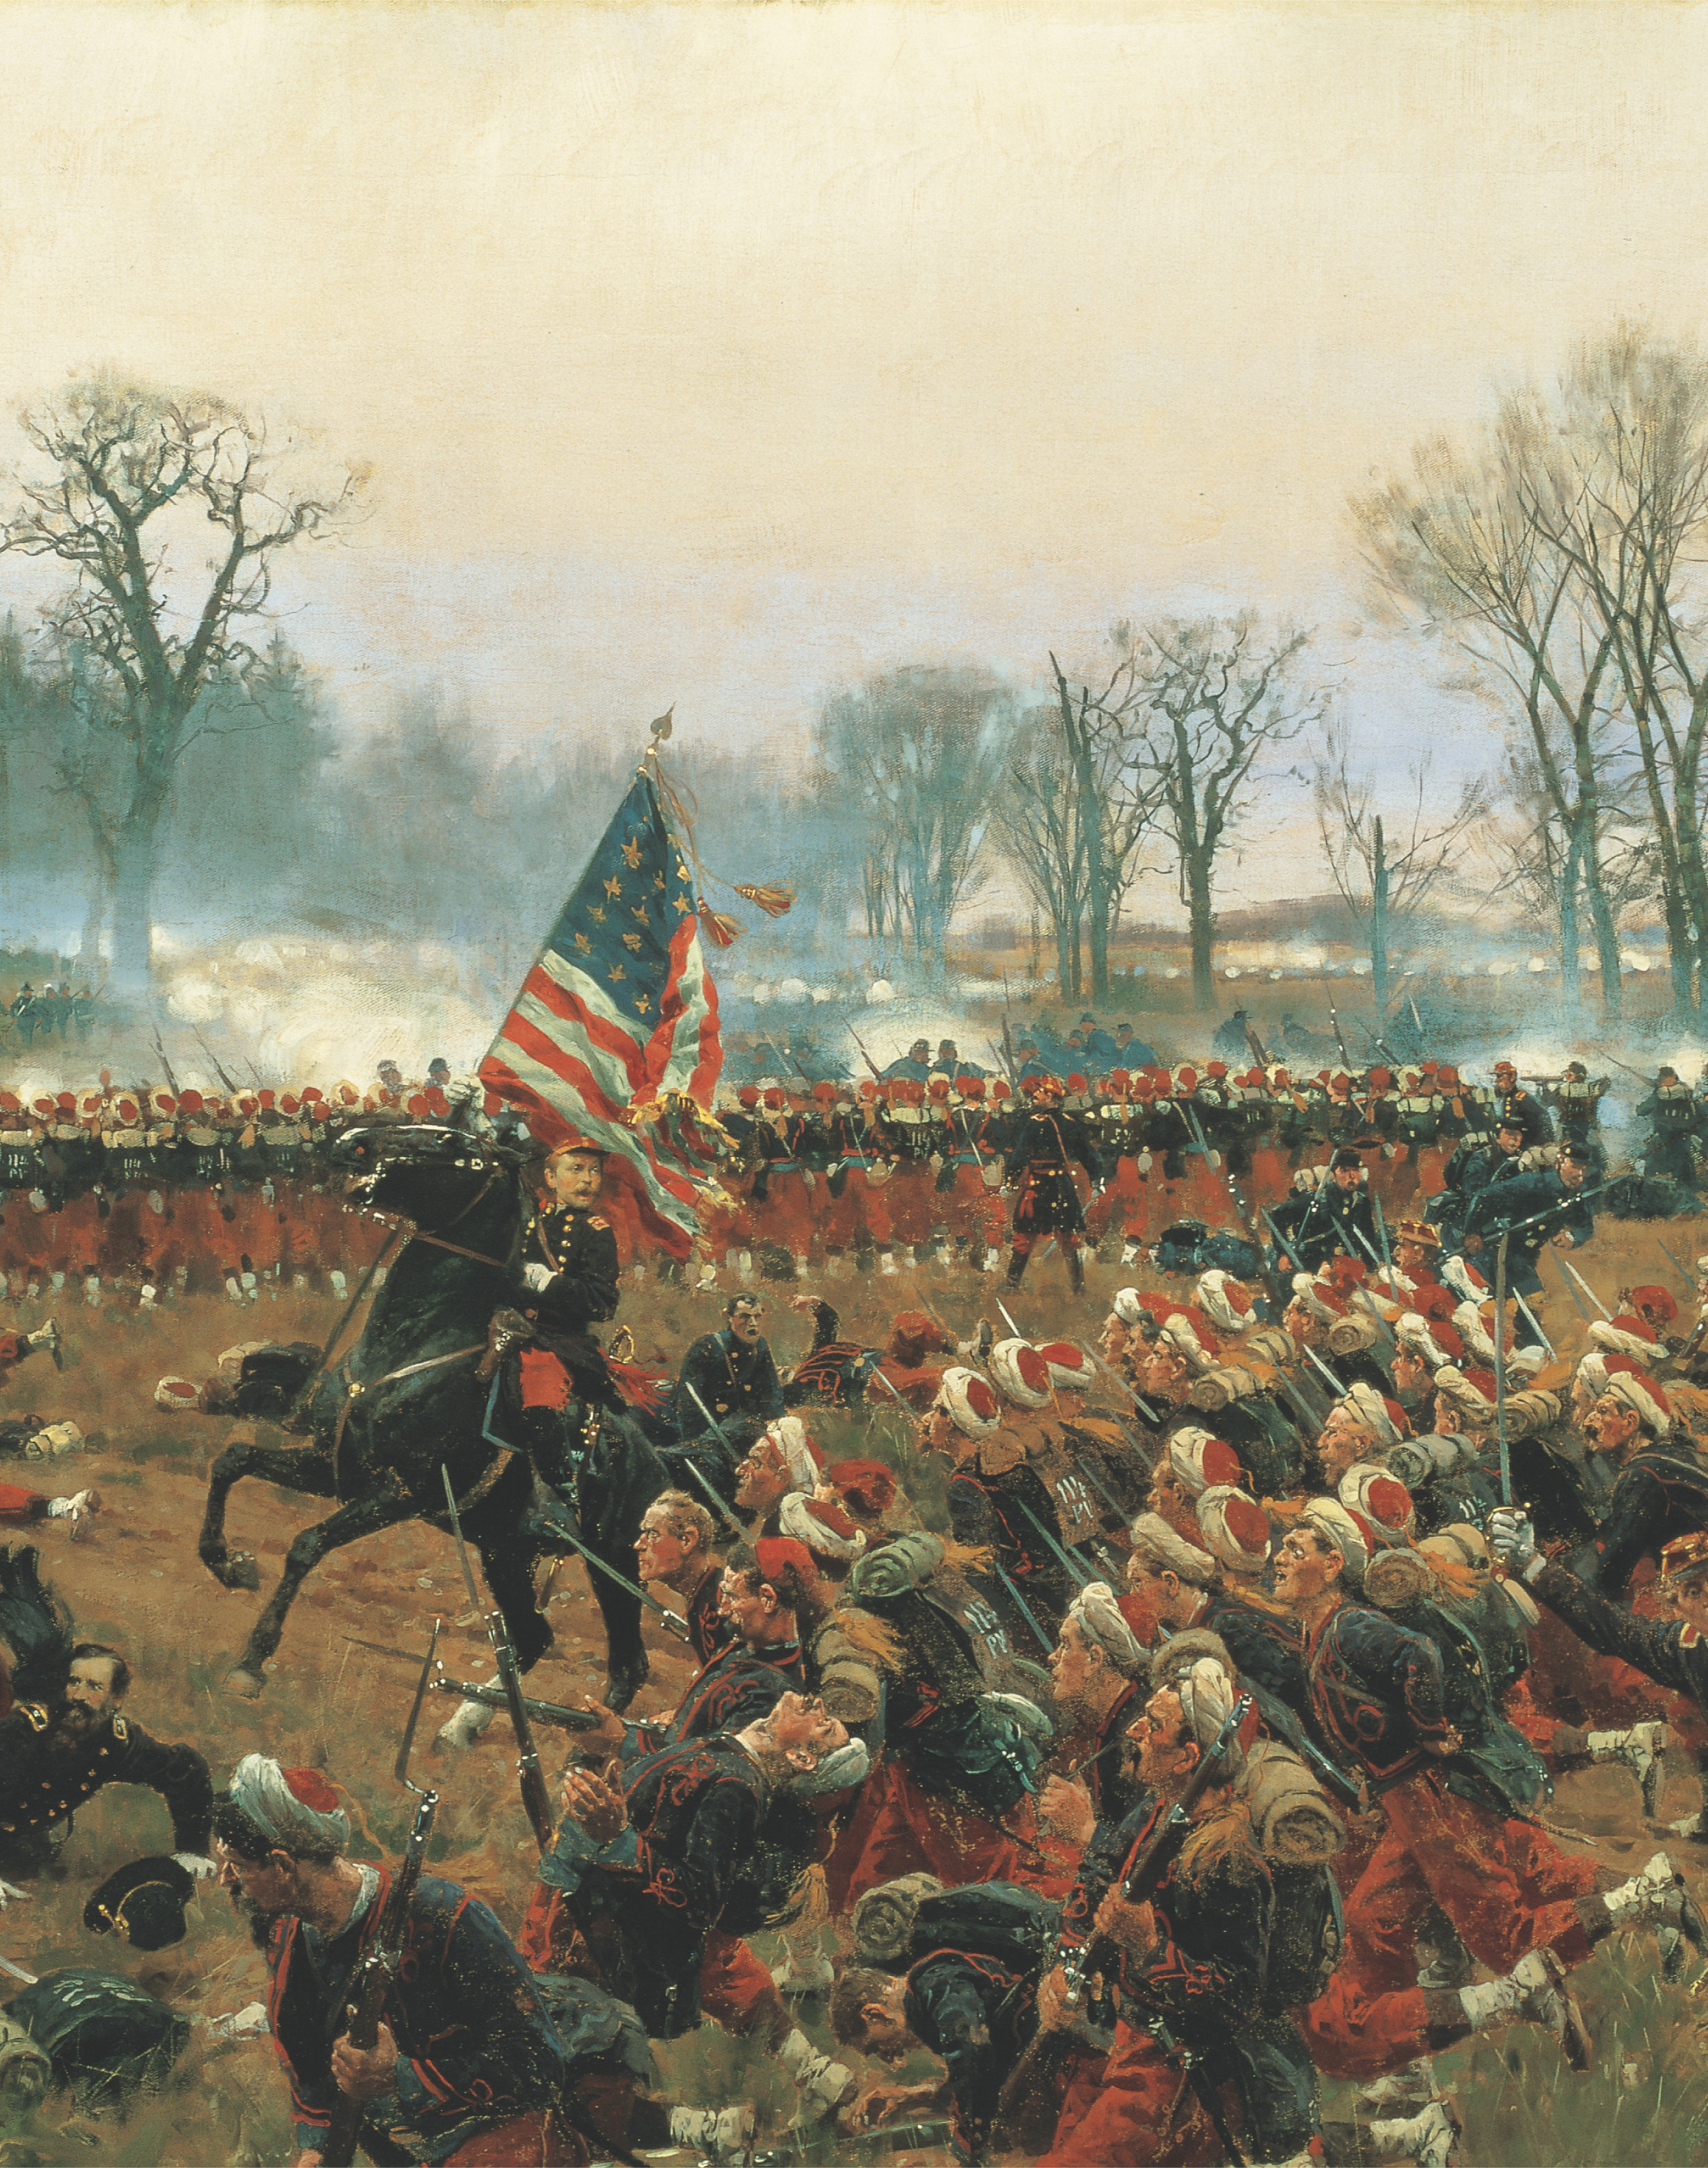 In a painting of a battle, soldiers fire cannons at charging
troops brandishing bayonnetted rifles. A man on horseback waves a tattered American flag.